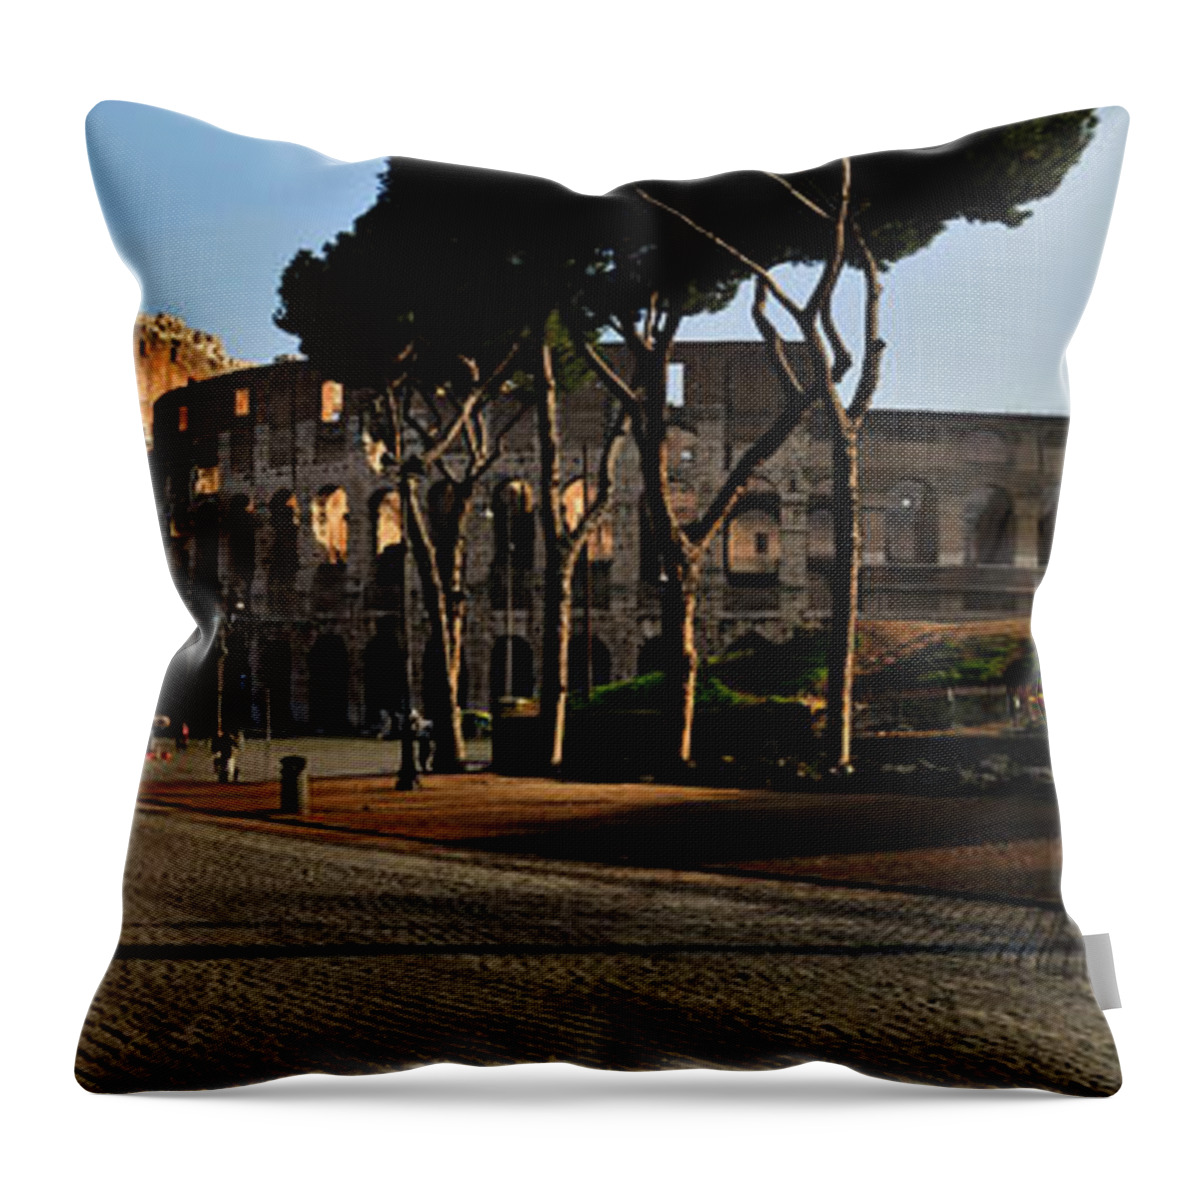 Rome Throw Pillow featuring the photograph The Roman Colosseum by Eric Liller